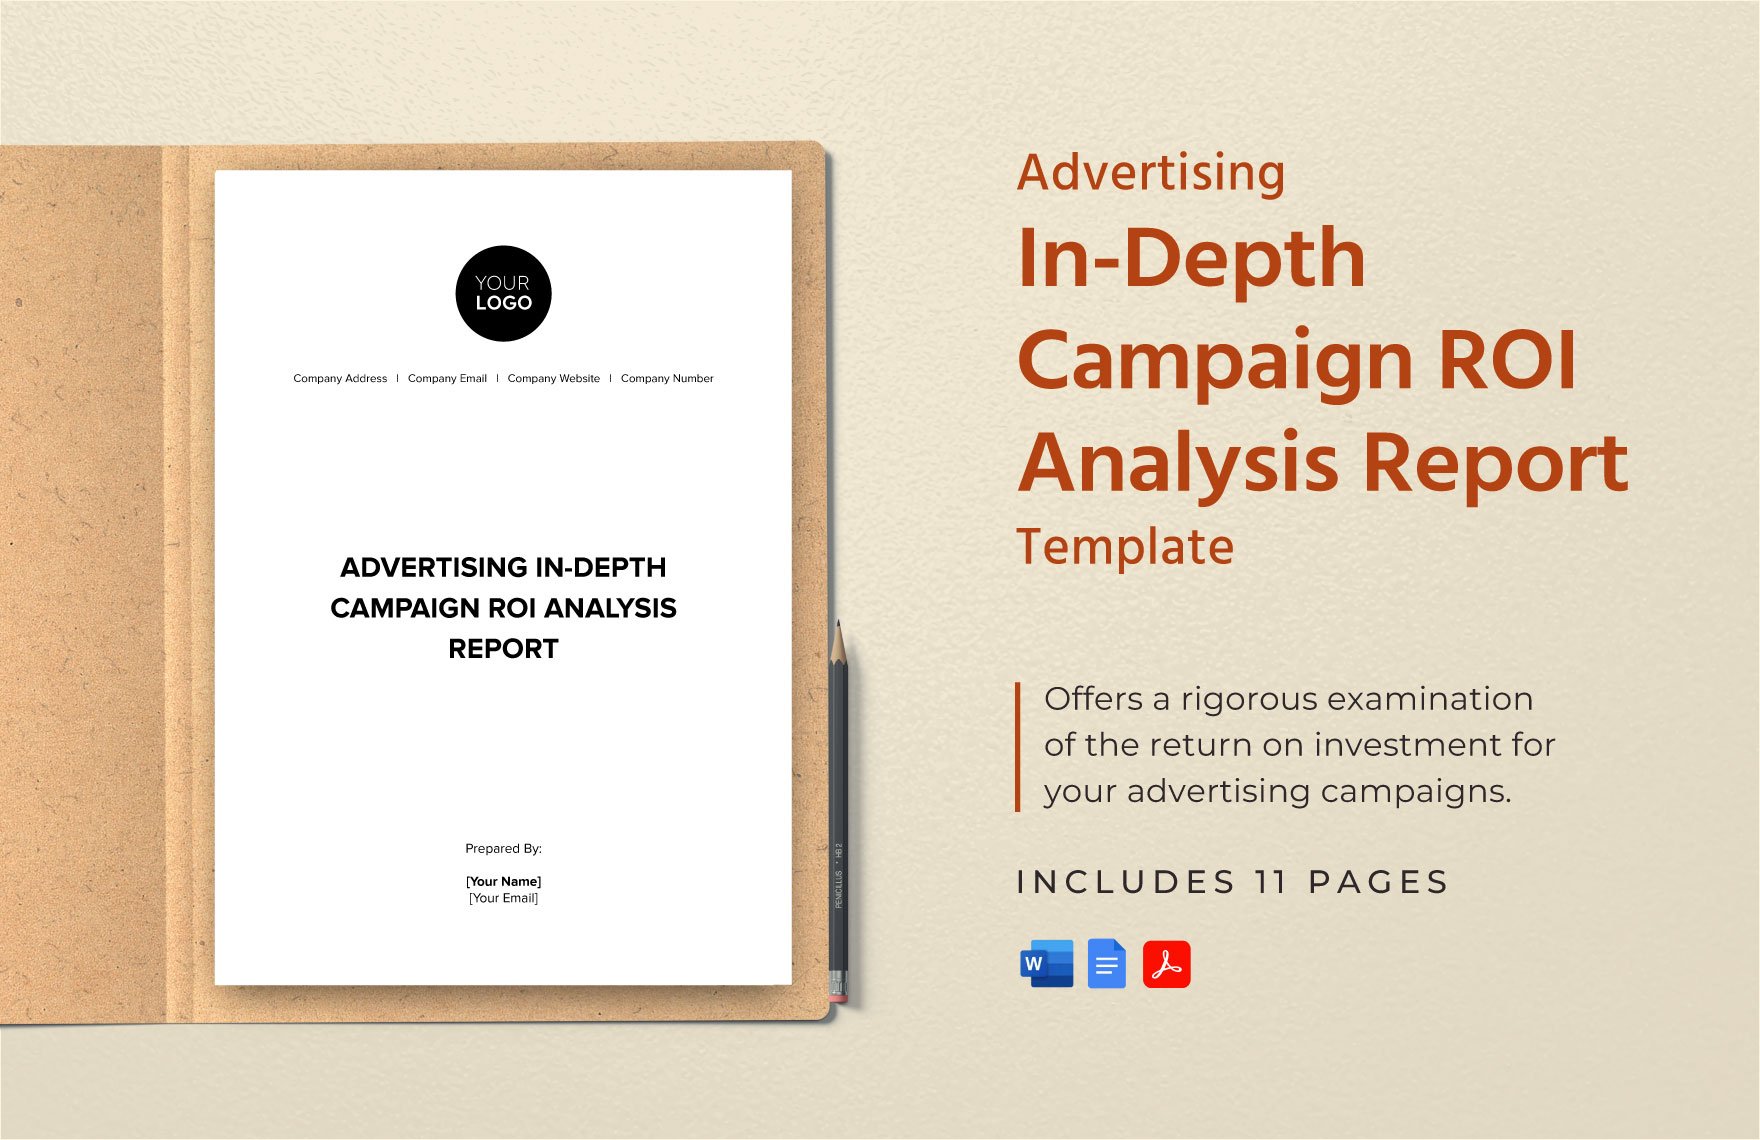 Advertising In-Depth Campaign ROI Analysis Report Template